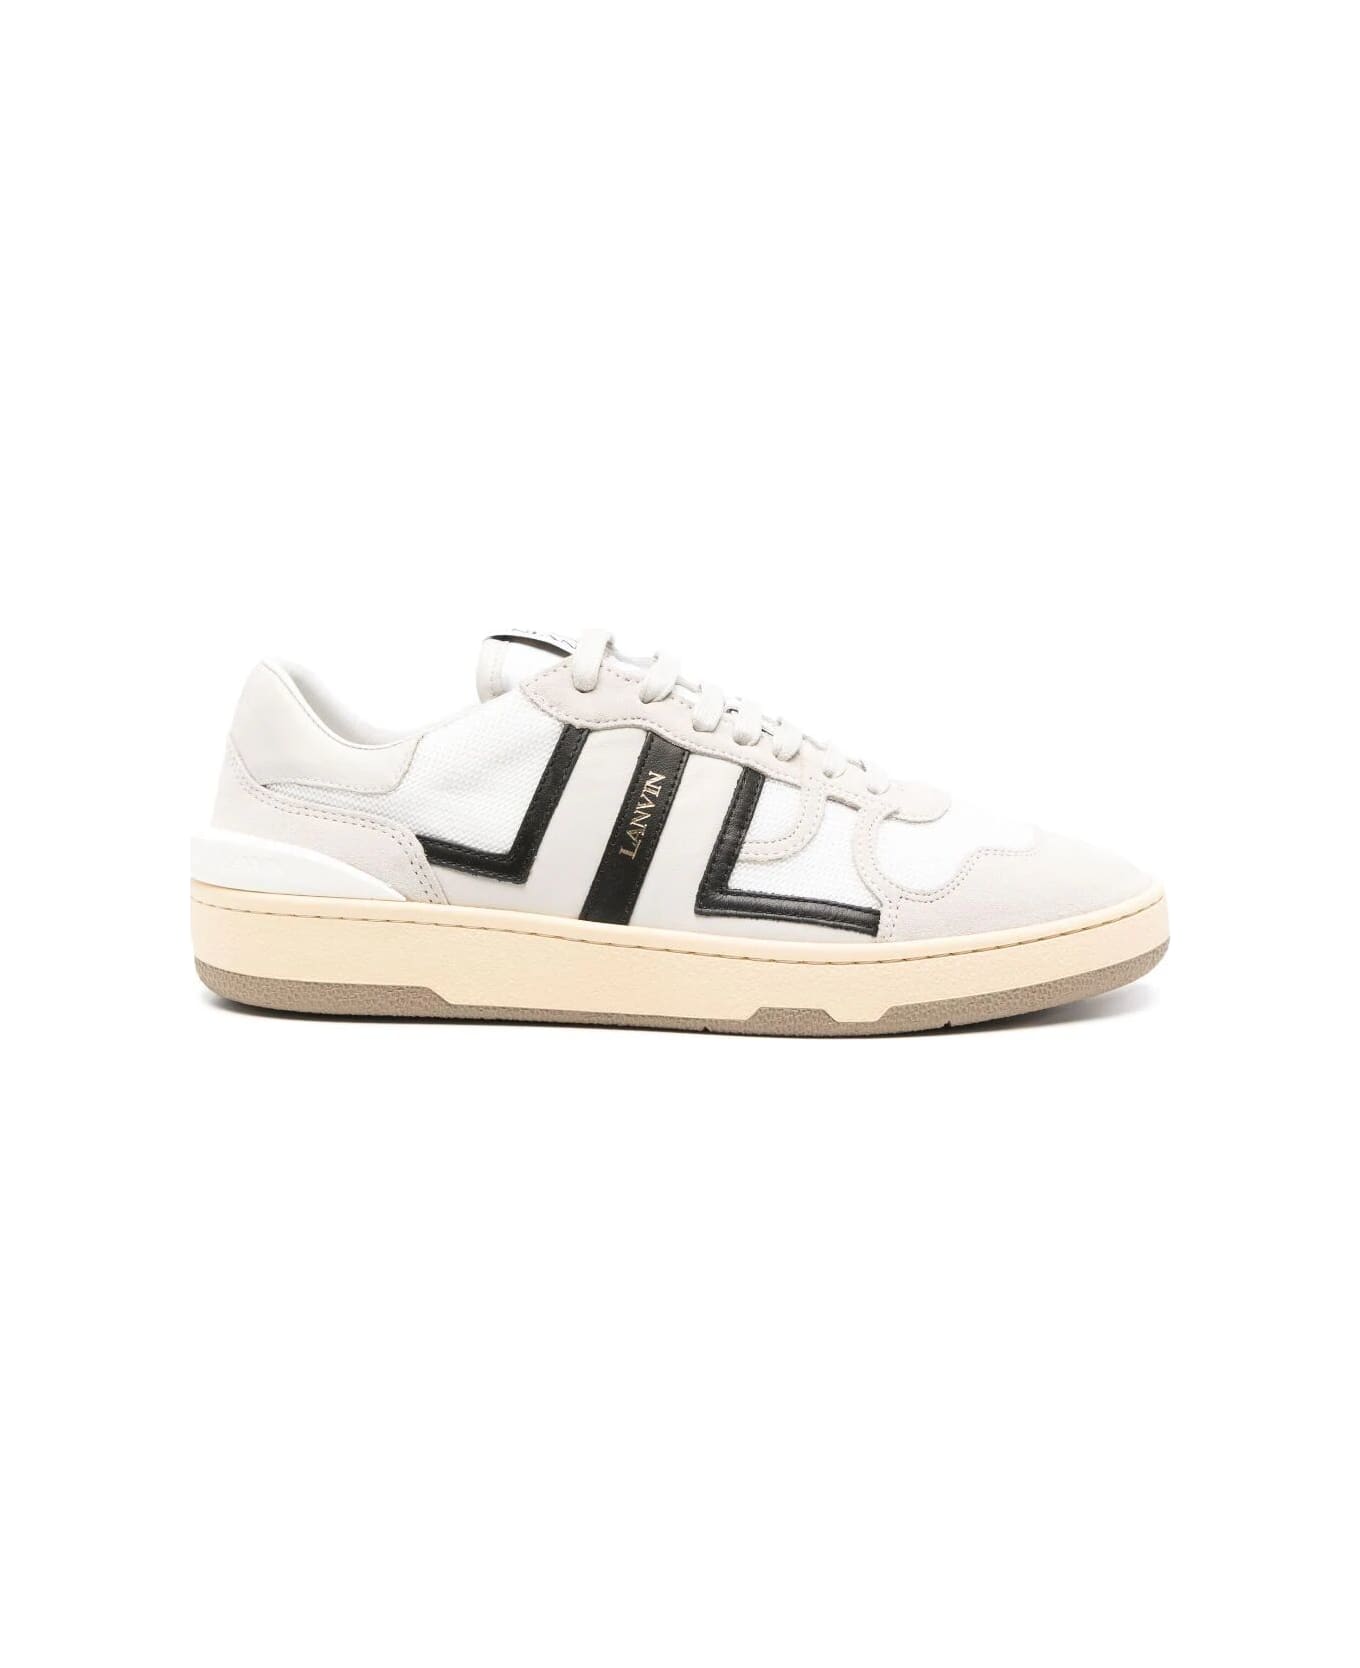 Lanvin Clay Low Top Sneakers - Black Off White スニーカー